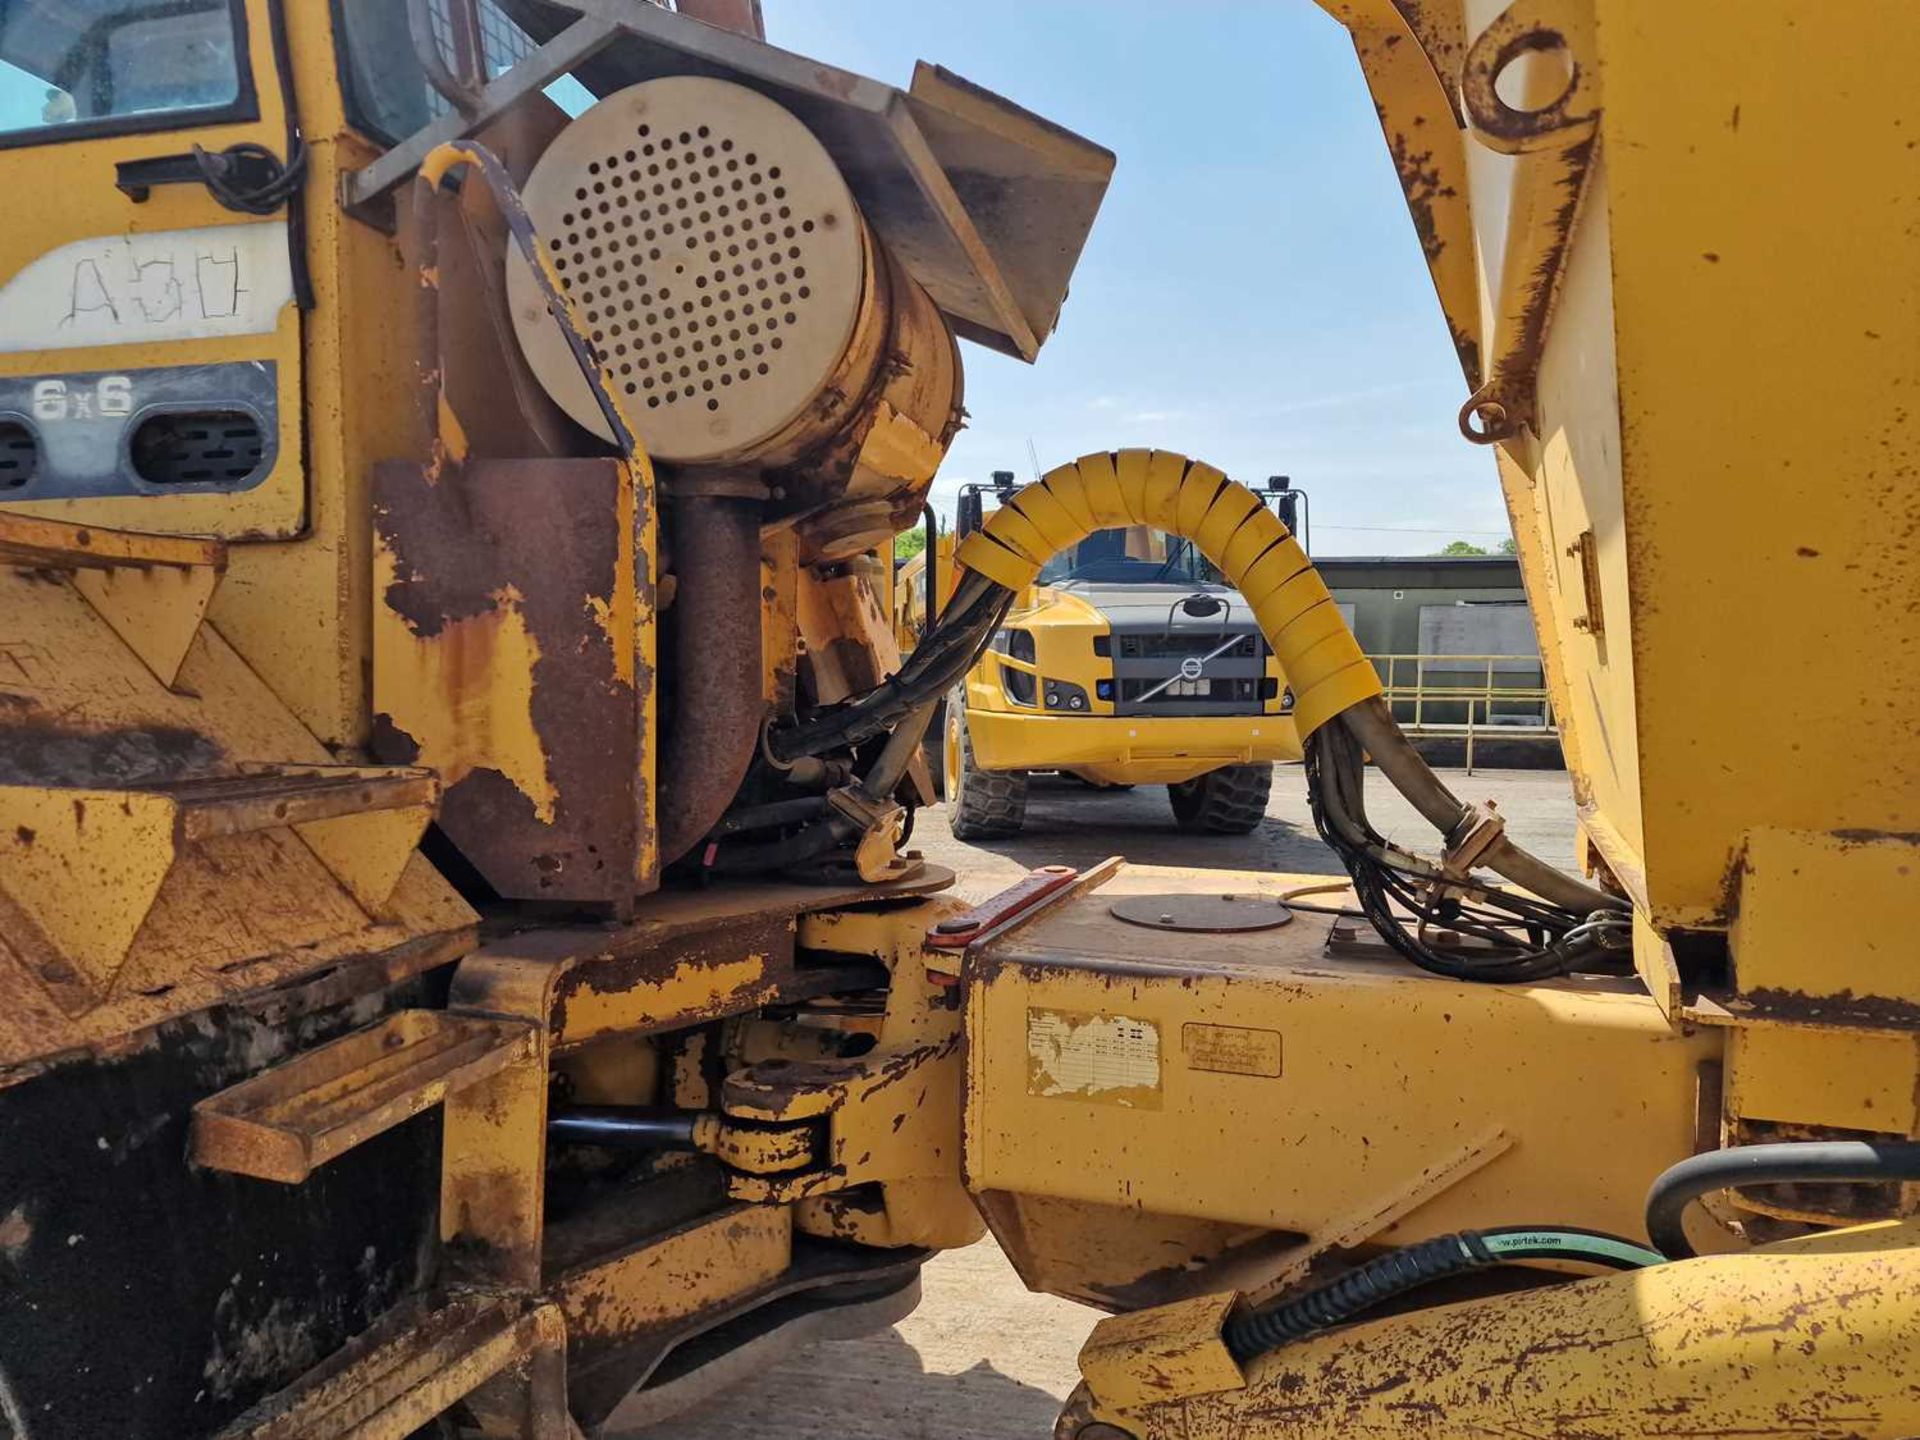 Volvo A30 6x6 Articulated Dumptruck, Reverse Camera - Image 17 of 35